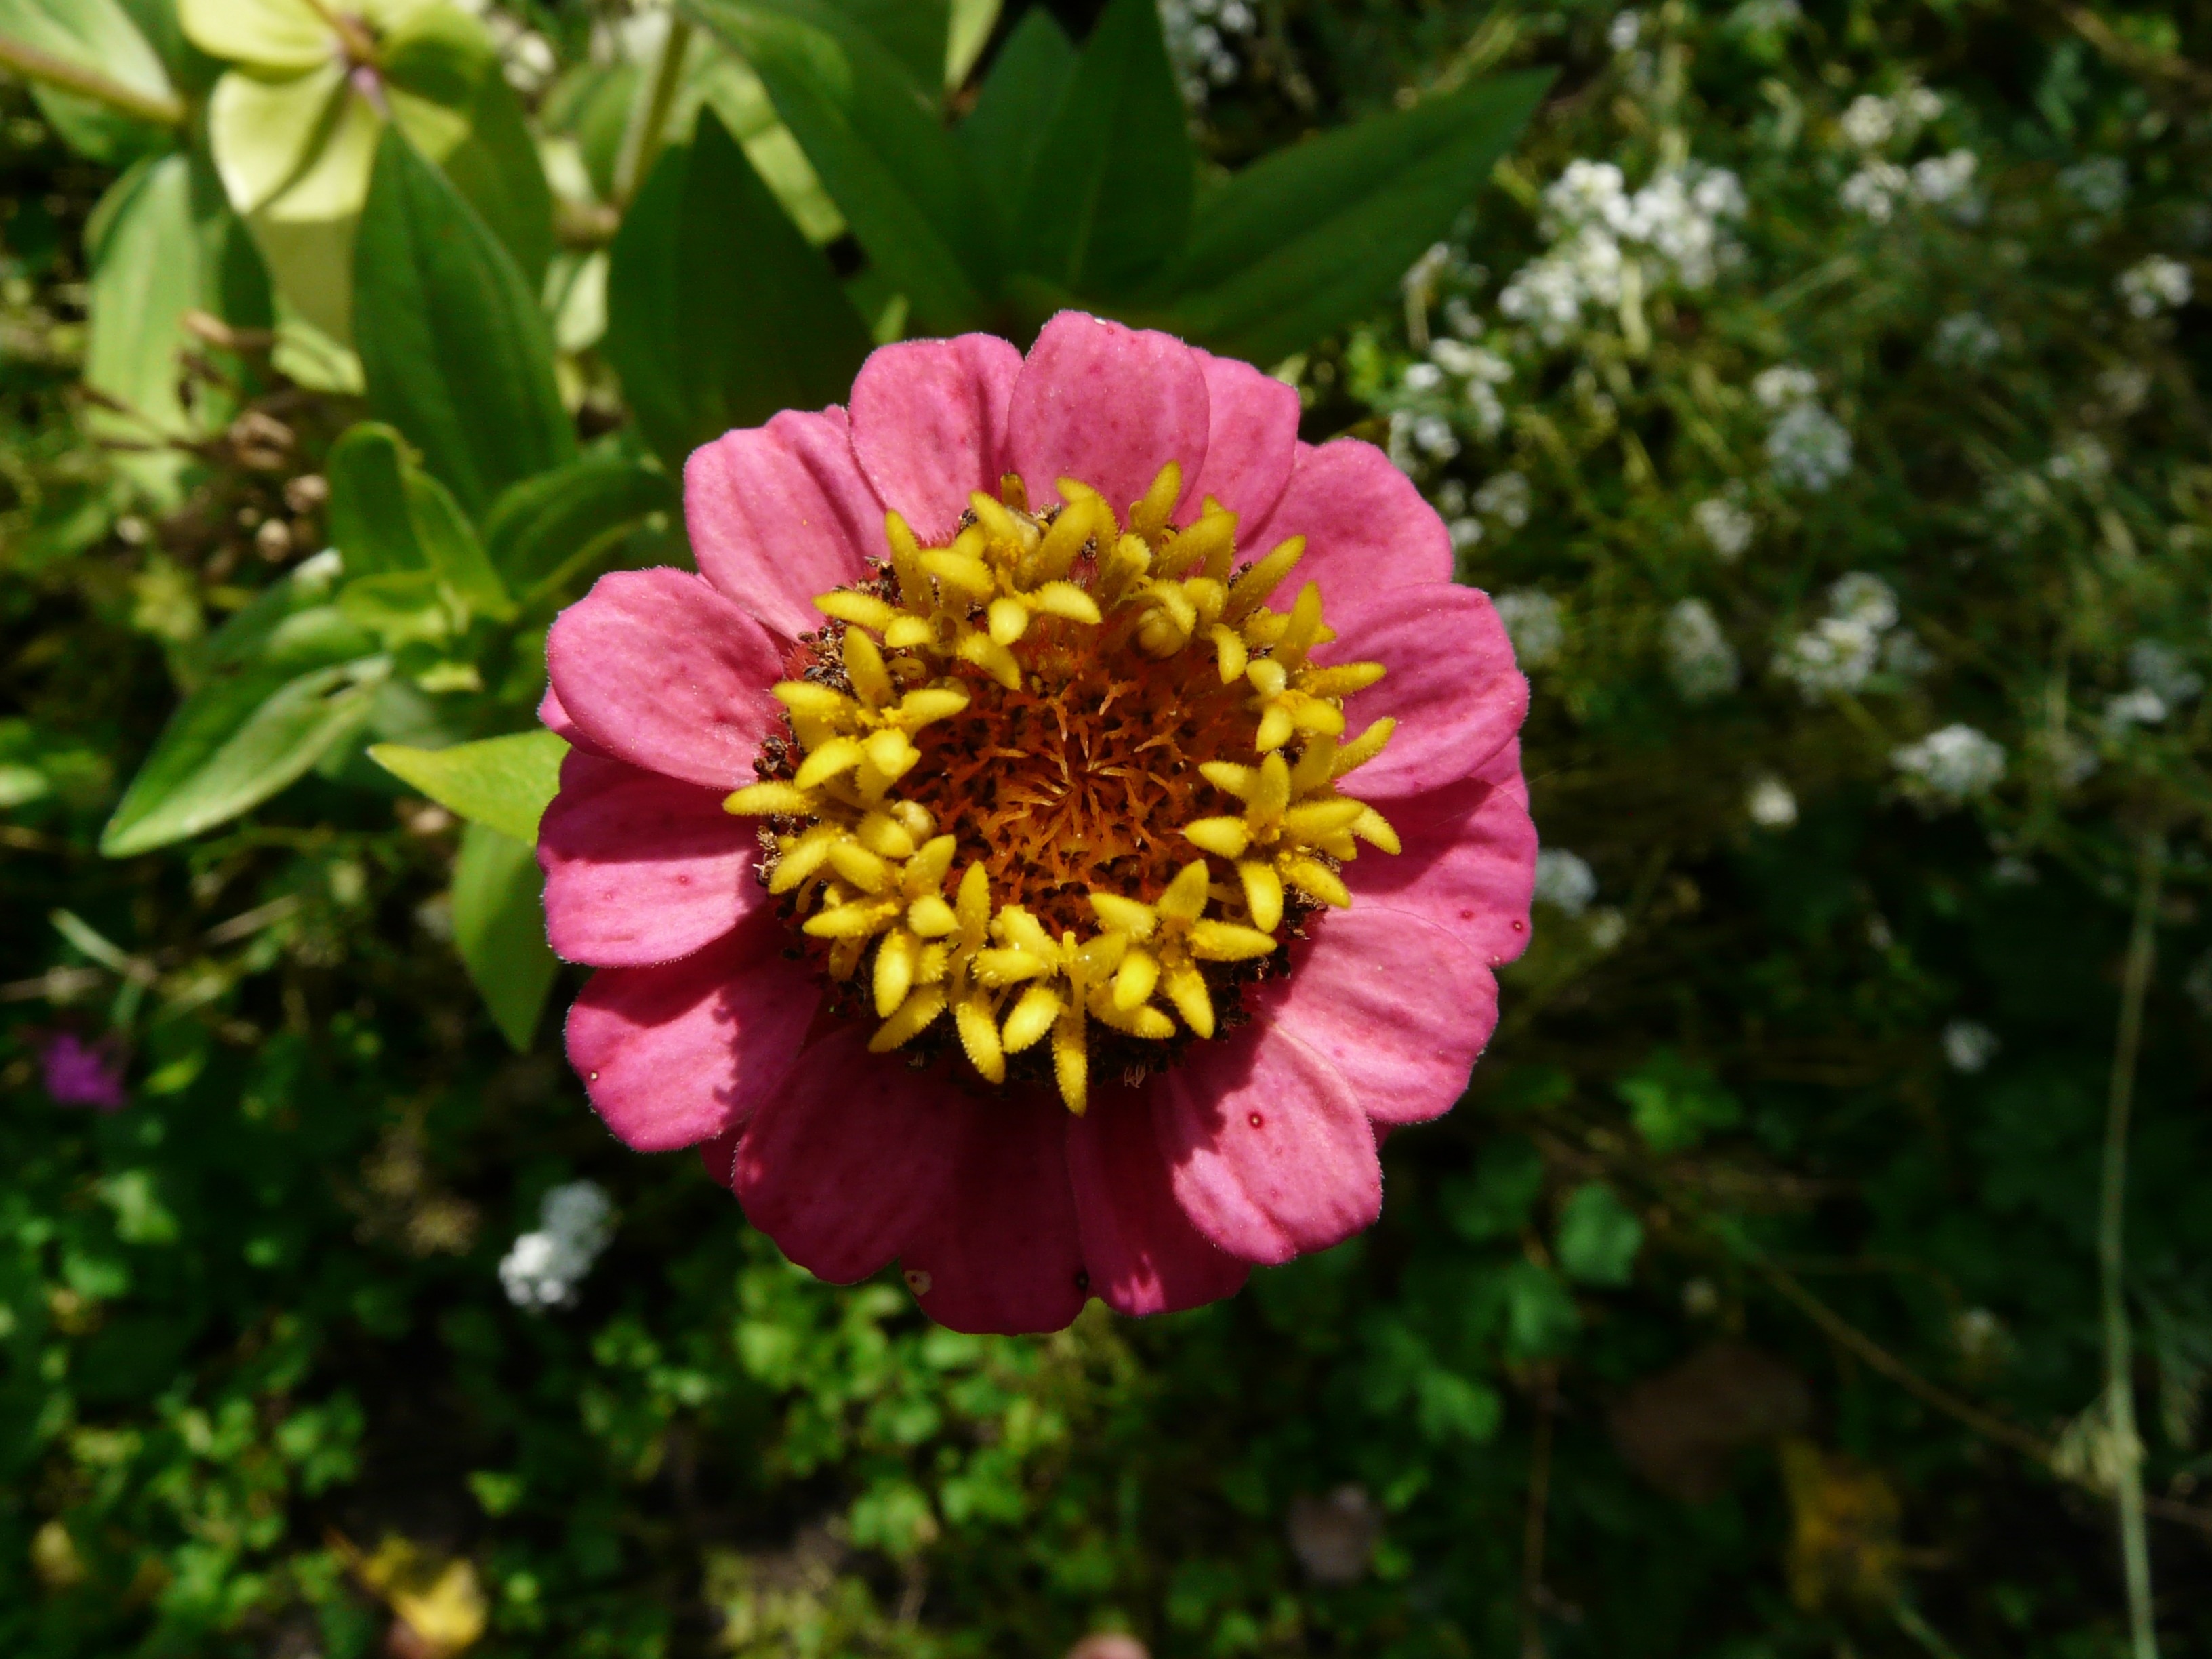 pink and yellow flower